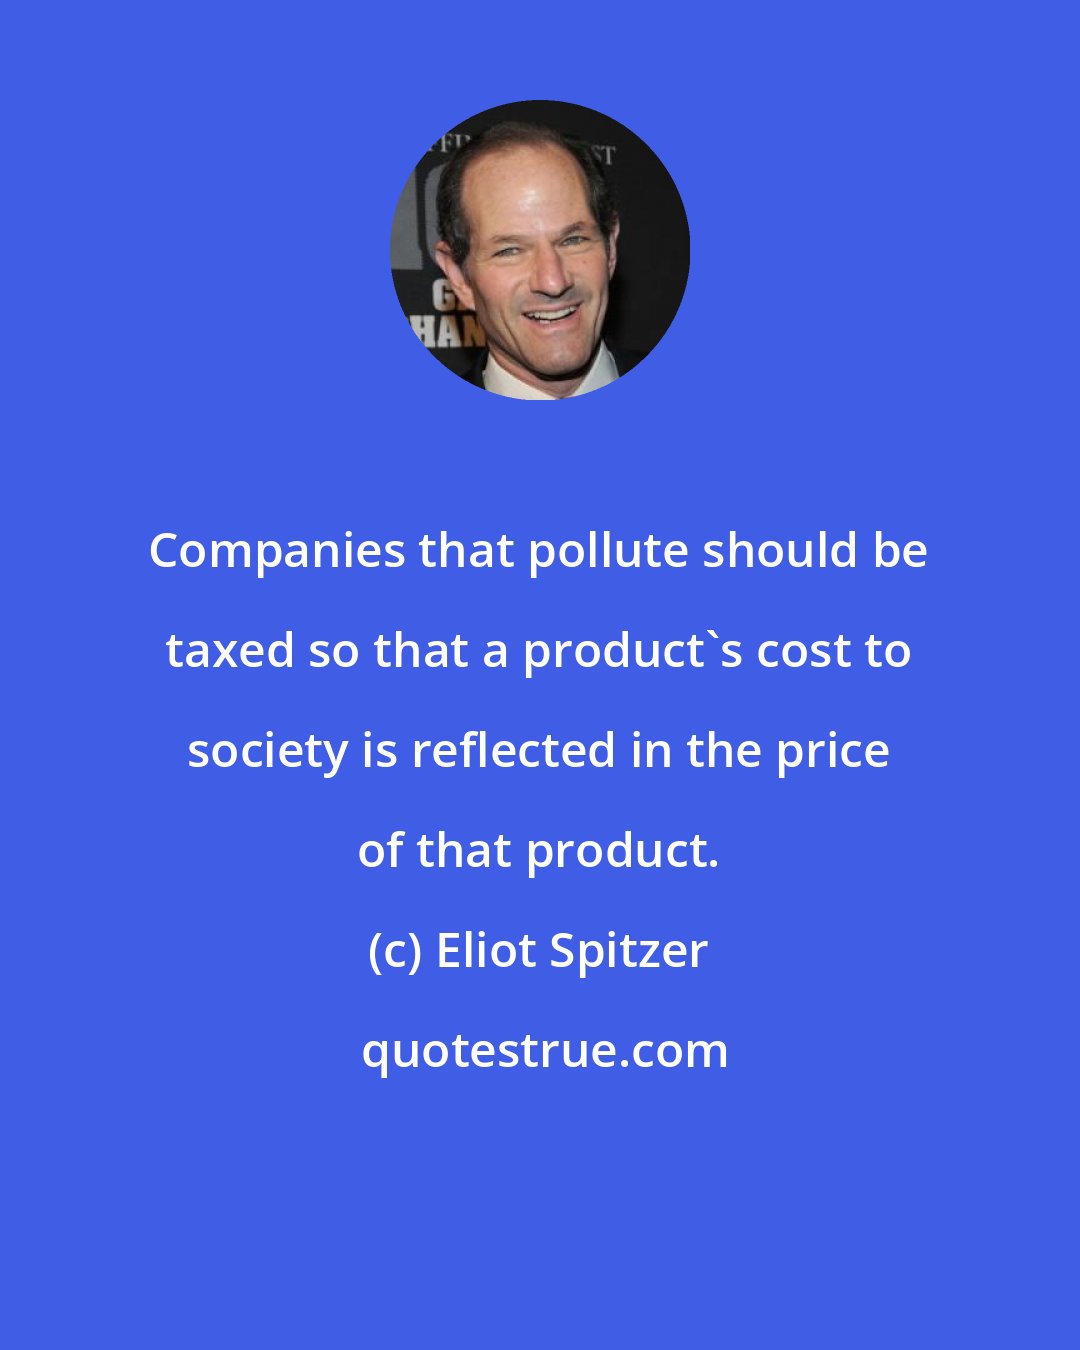 Eliot Spitzer: Companies that pollute should be taxed so that a product's cost to society is reflected in the price of that product.